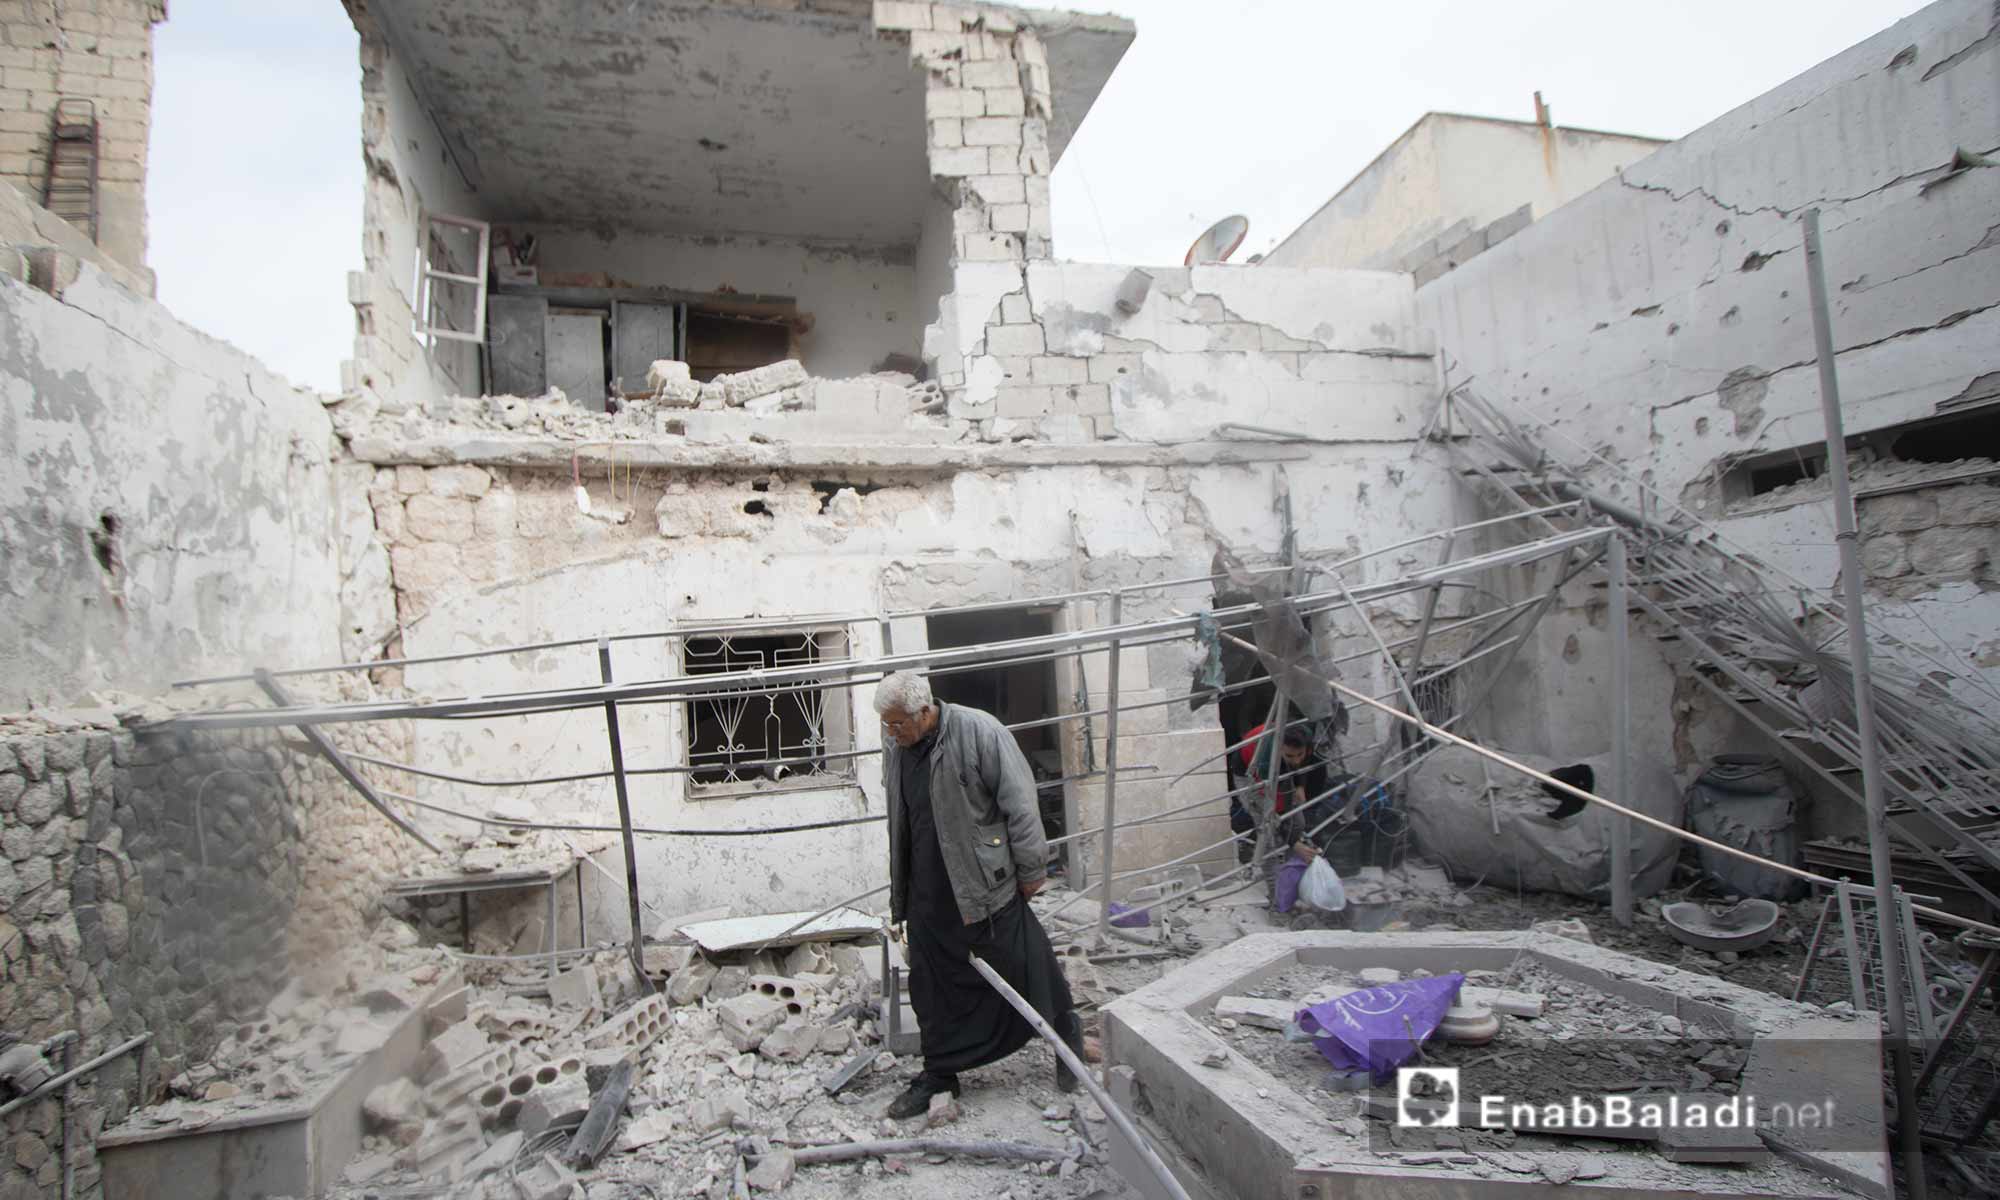 The destruction caused  by aerial shelling of residential neighborhoods and service centers in the city of Saraqib, eastern Idlib – March 10, 2019 (Enab Baladi)